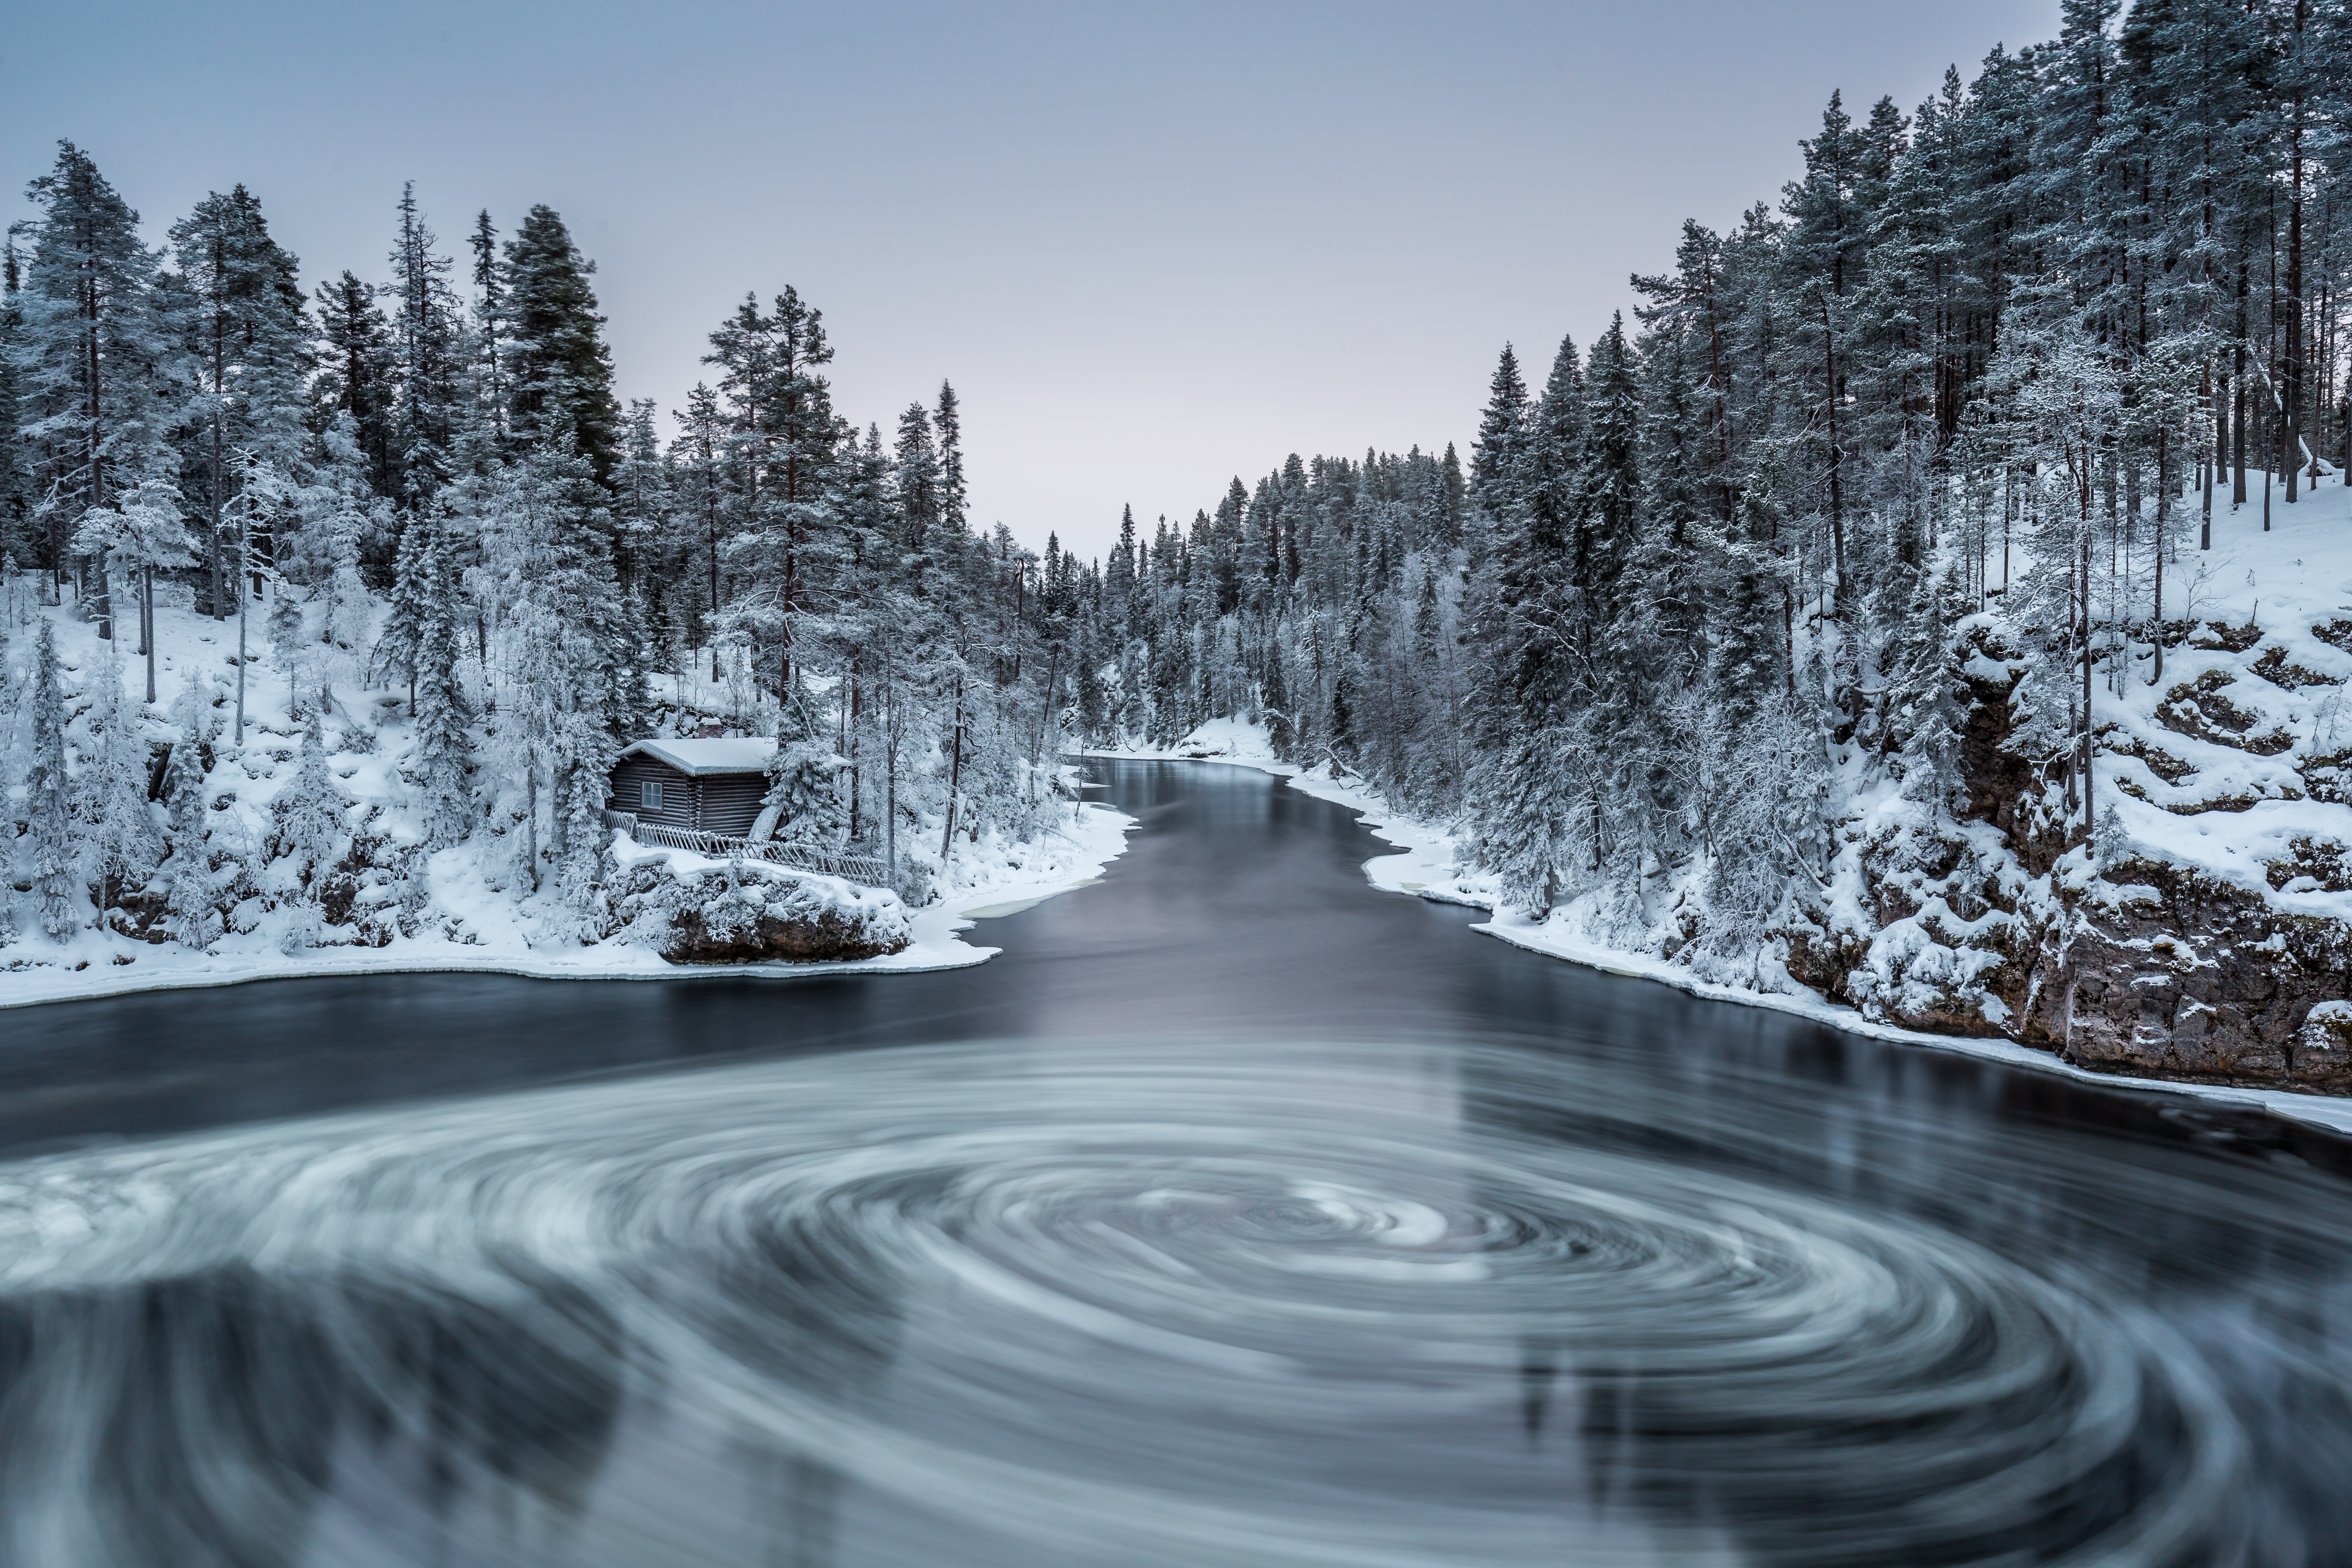 Free photo A whirlpool in a lake with snow banks